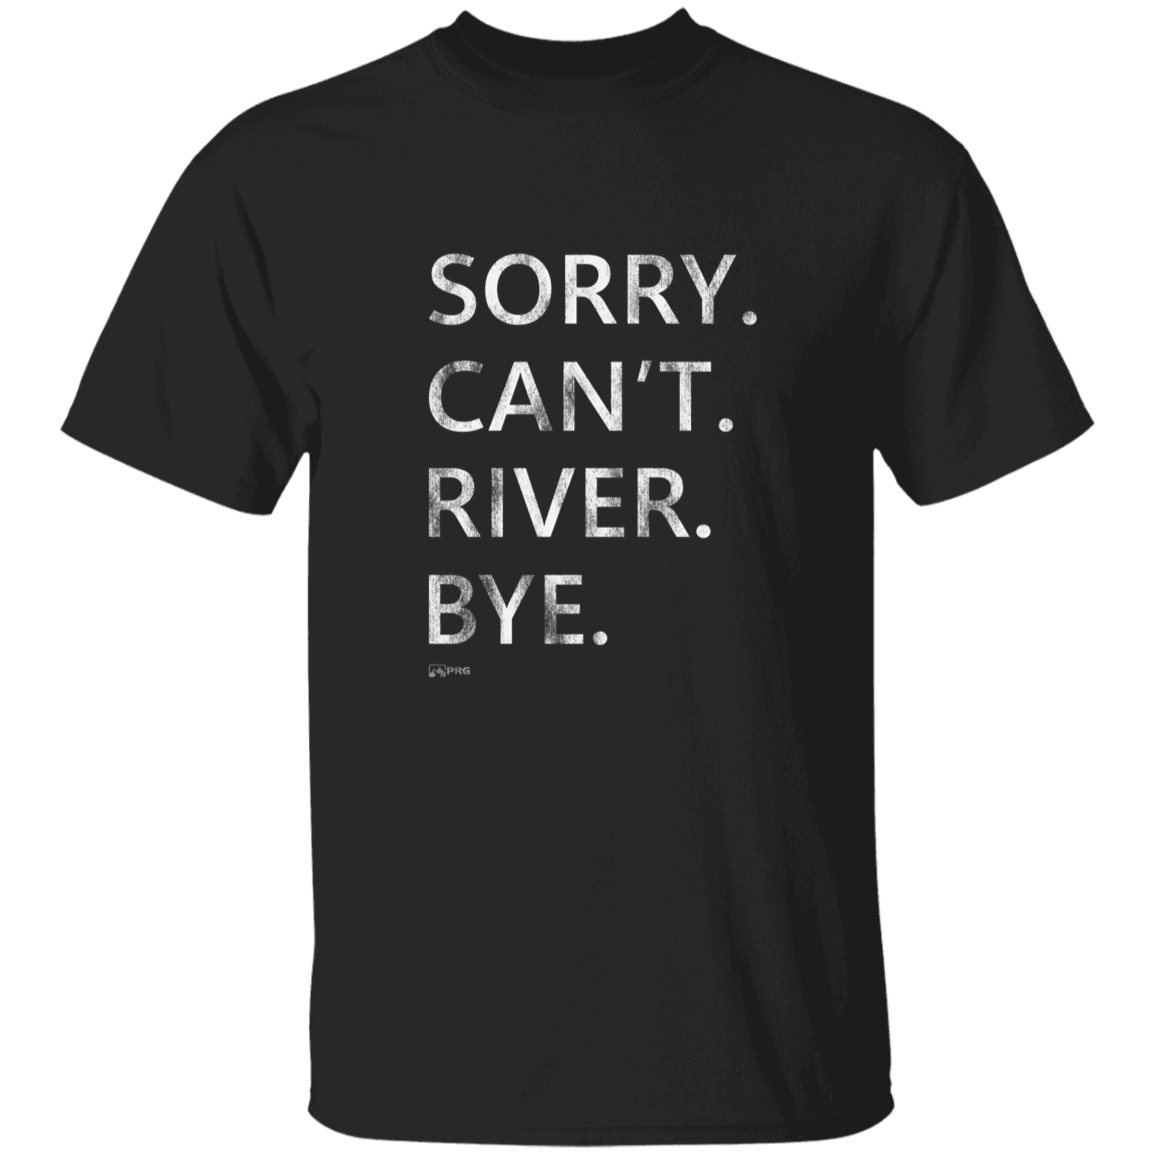 Sorry. Can't. River. Bye. - Youth Shirt